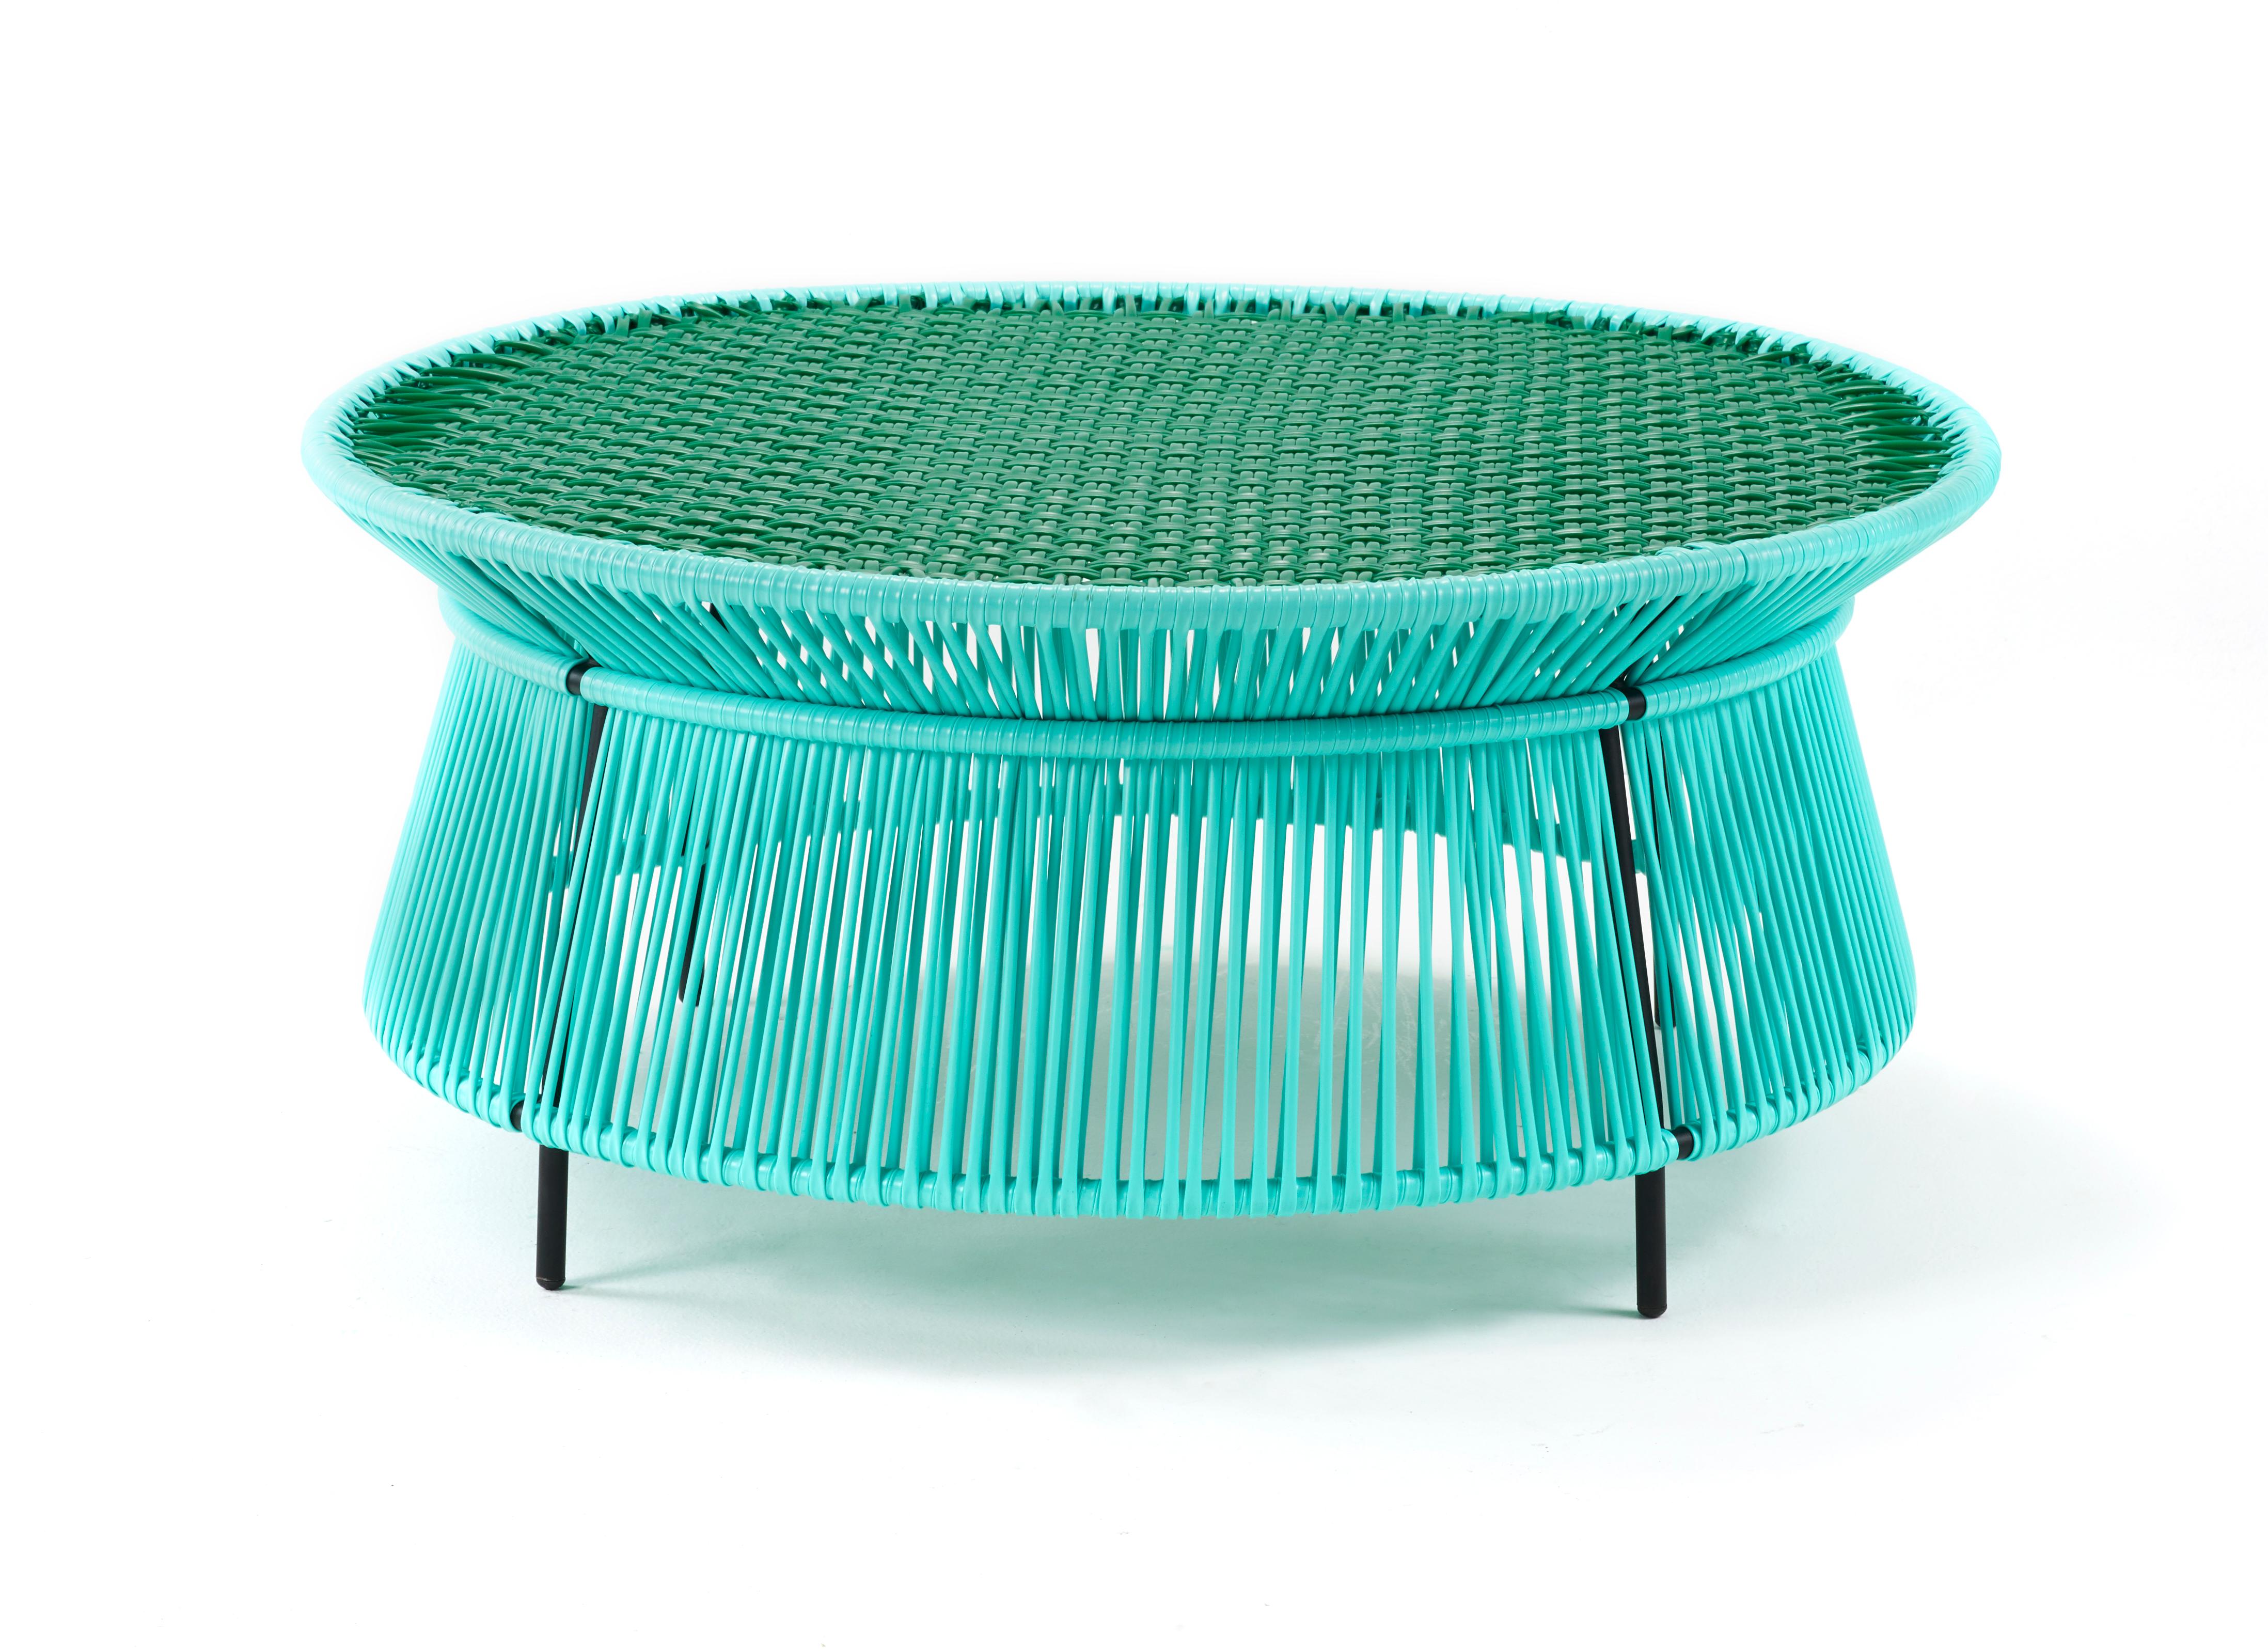 Mint Caribe low table by Sebastian Herkner
Materials: Galvanized and powder-coated tubular steel. PVC strings are made from recycled plastic.
Technique: Made from recycled plastic and weaved by local craftspeople in Colombia. 
Dimensions: